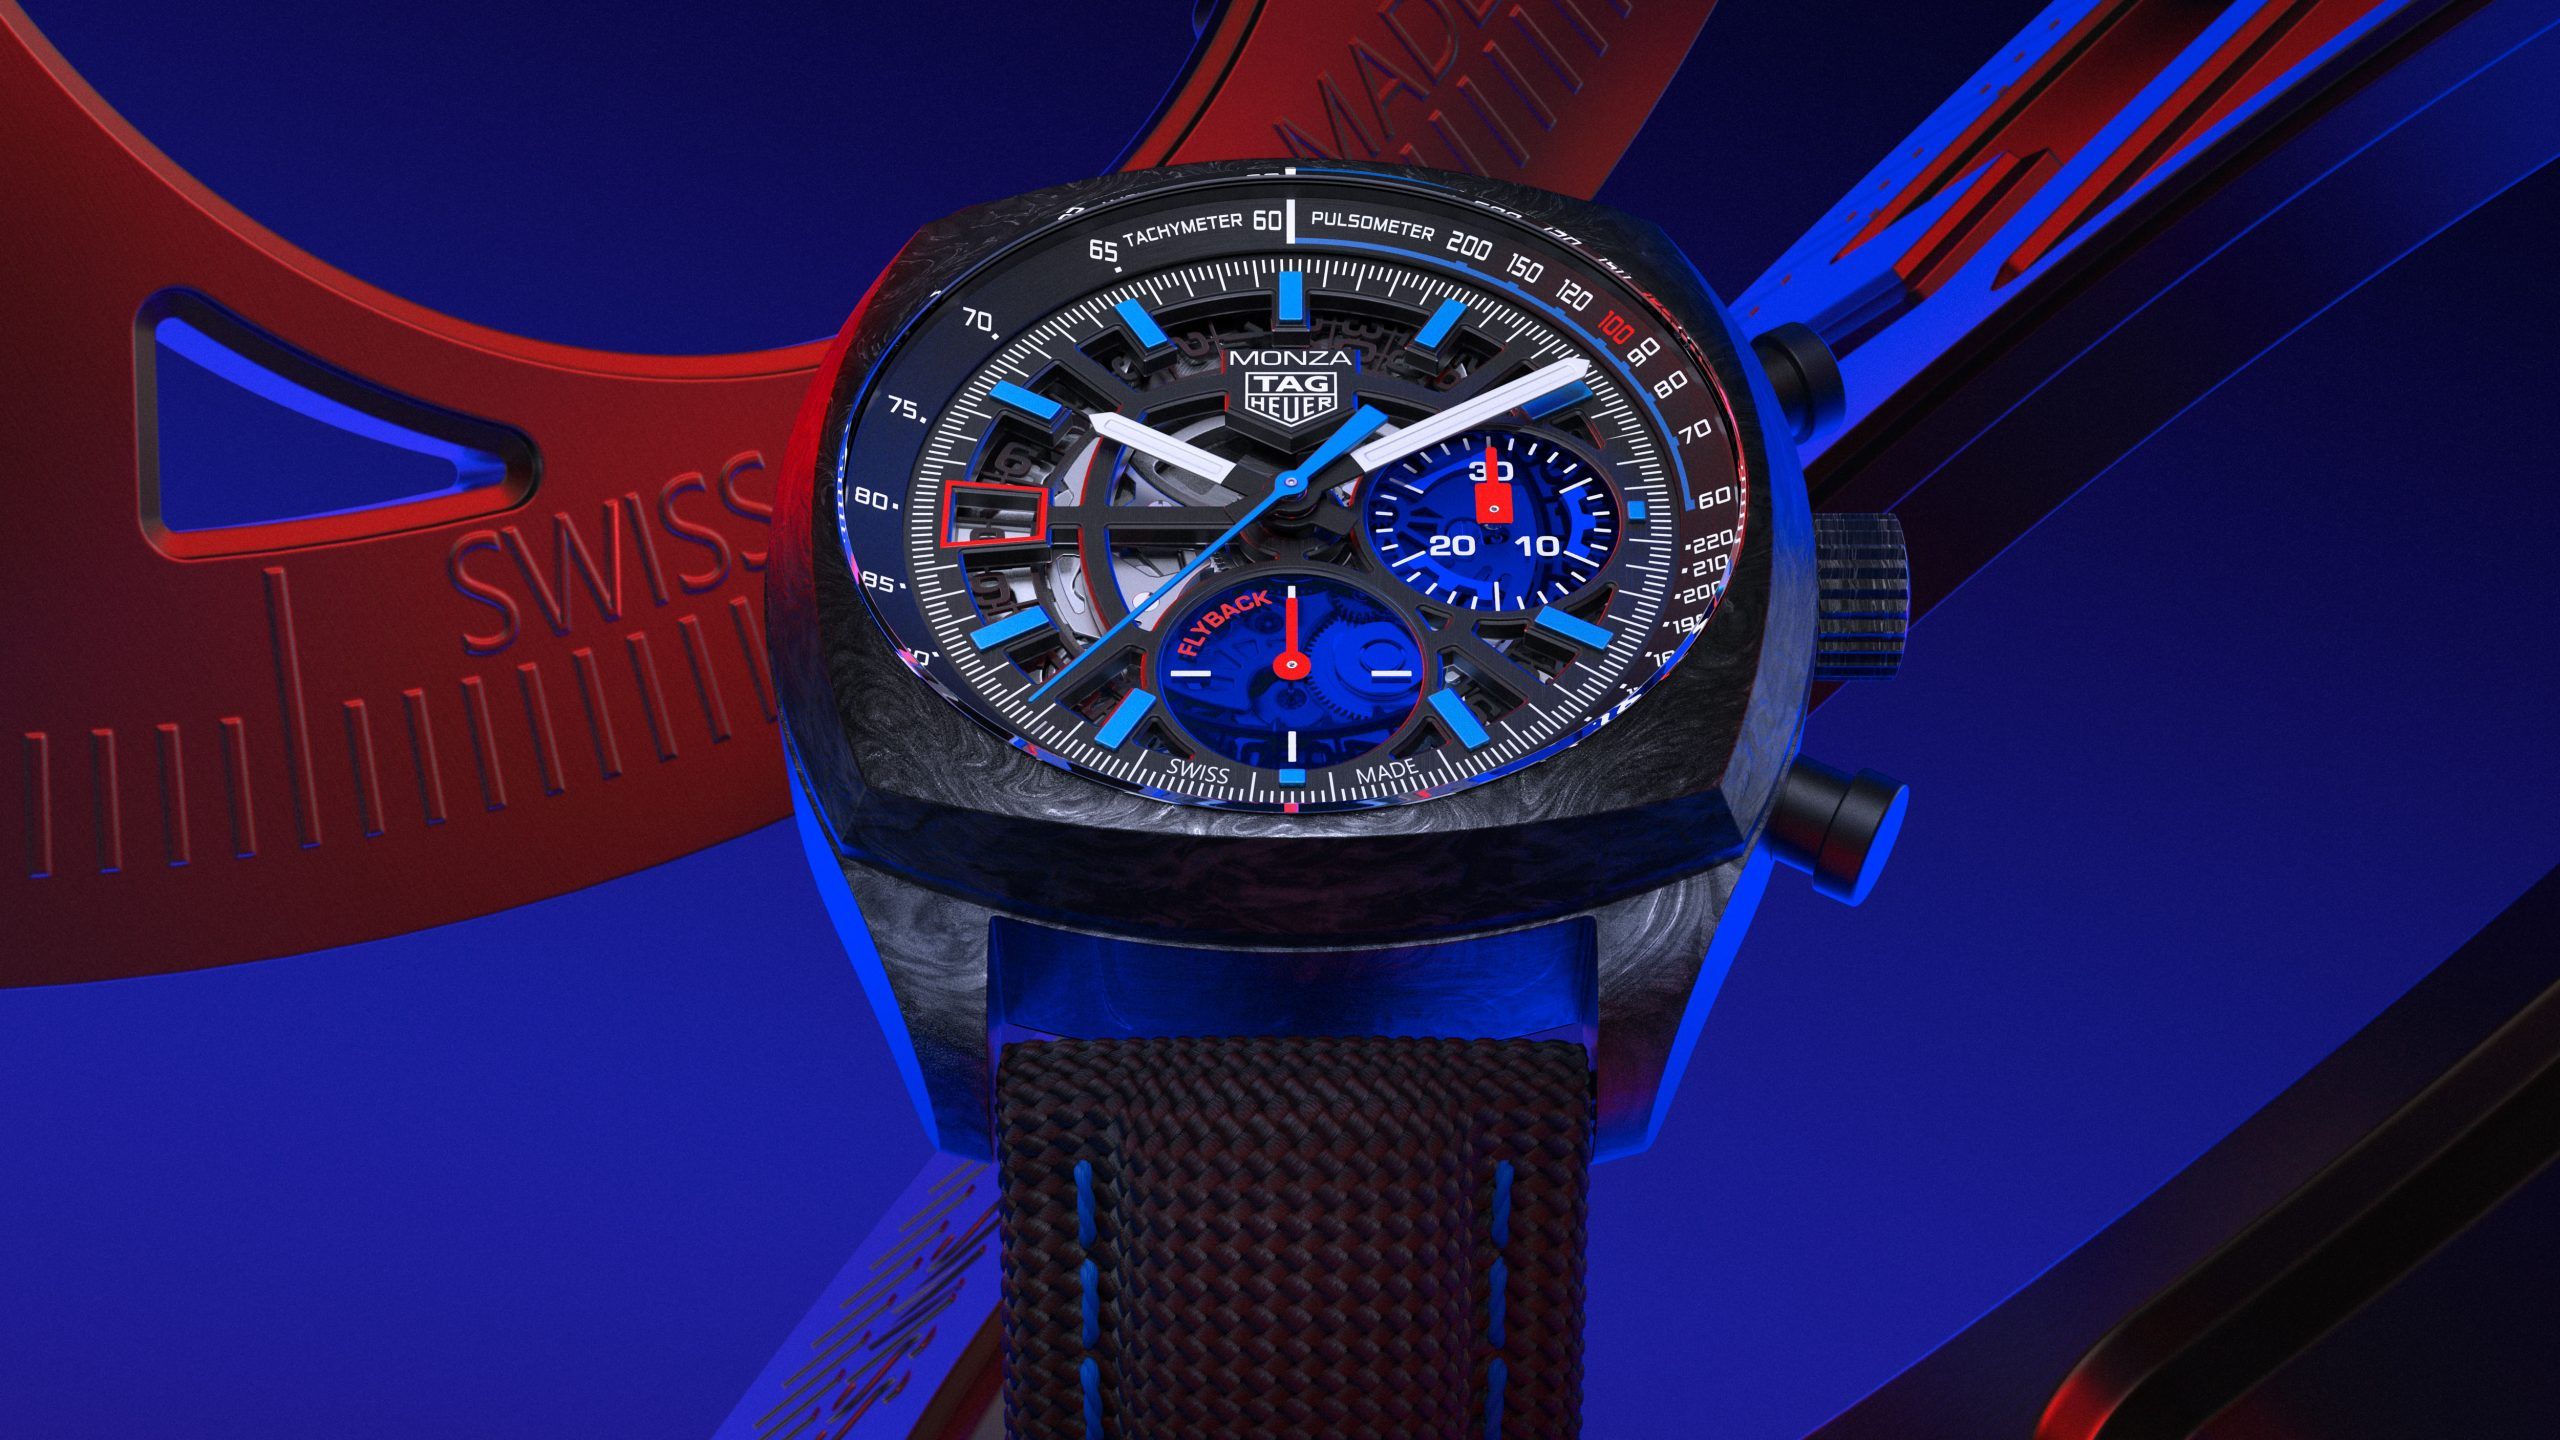 TAG Heuer and Hublot help LVMH increase sales by 5% to €37.6 billion